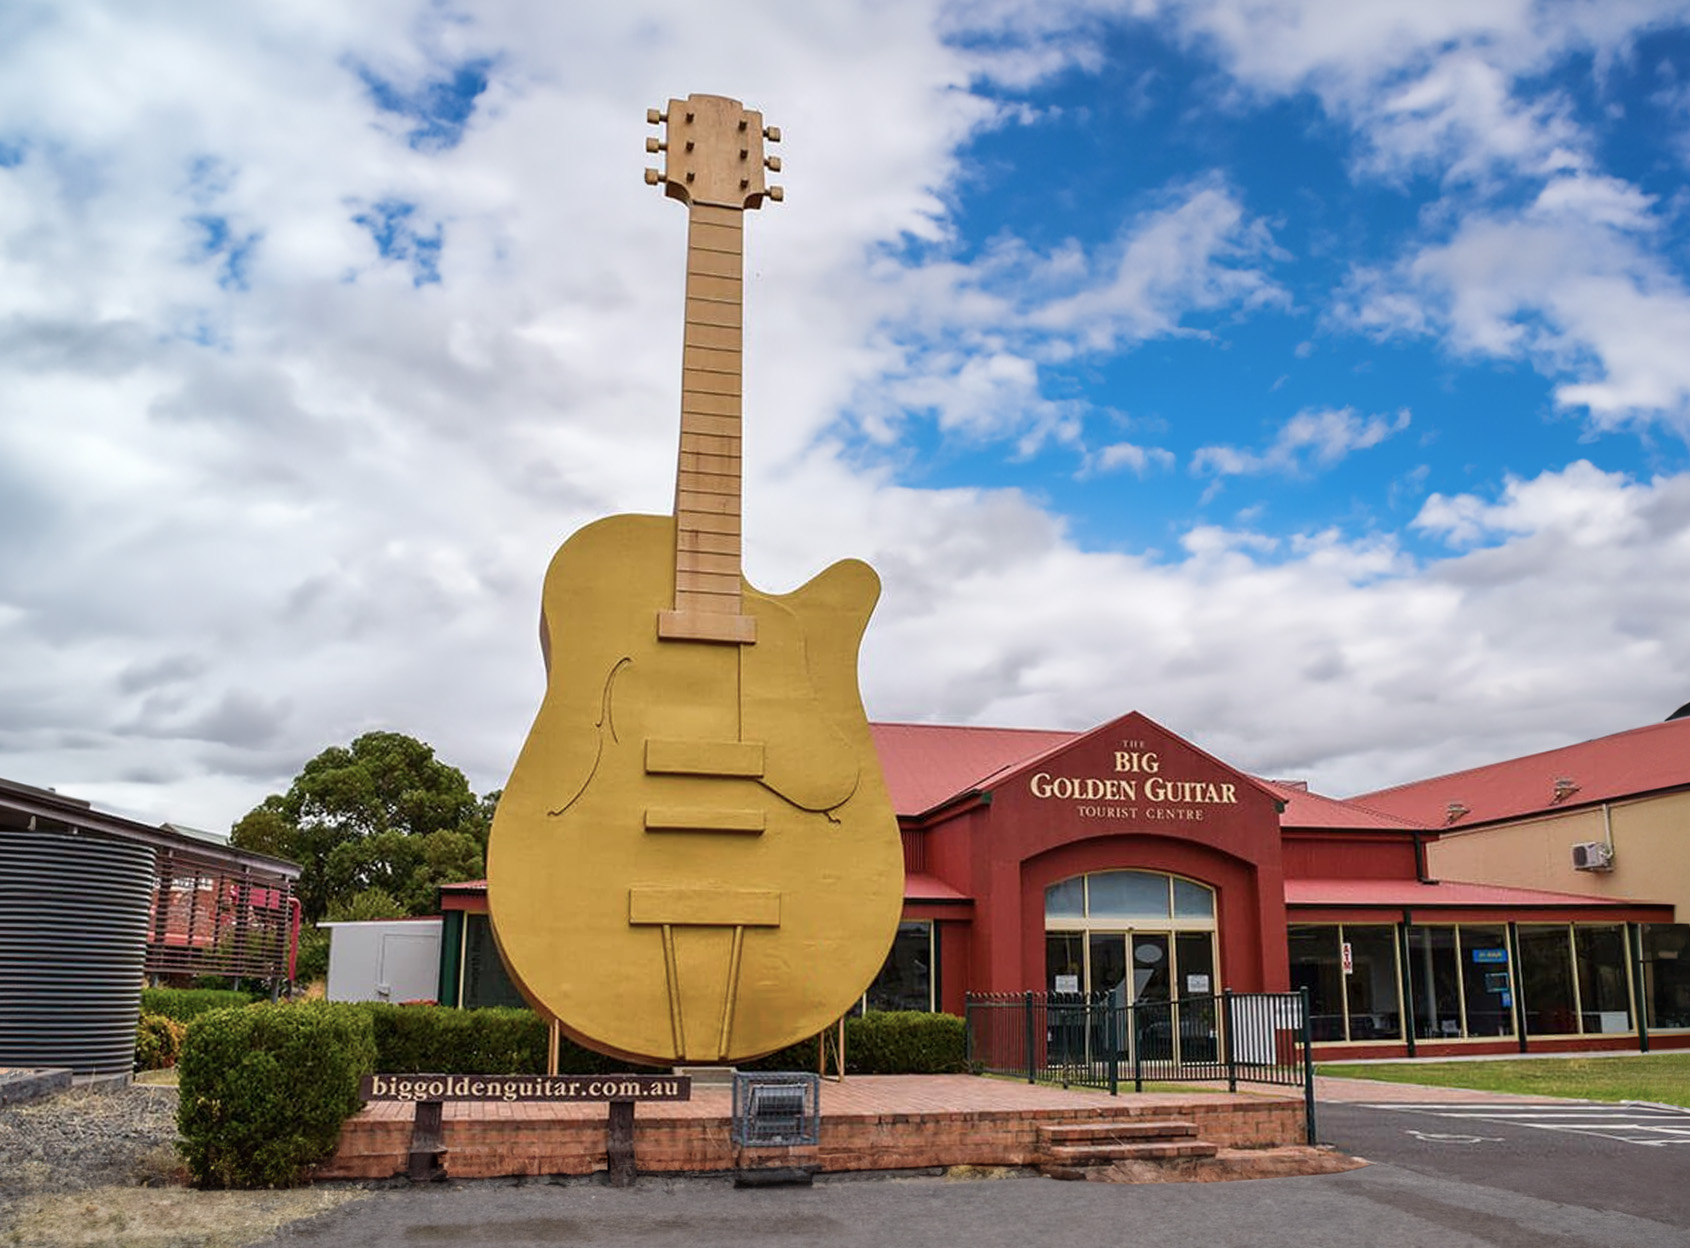 The Big Golden Guitar - 12 metres high and installed in 1988